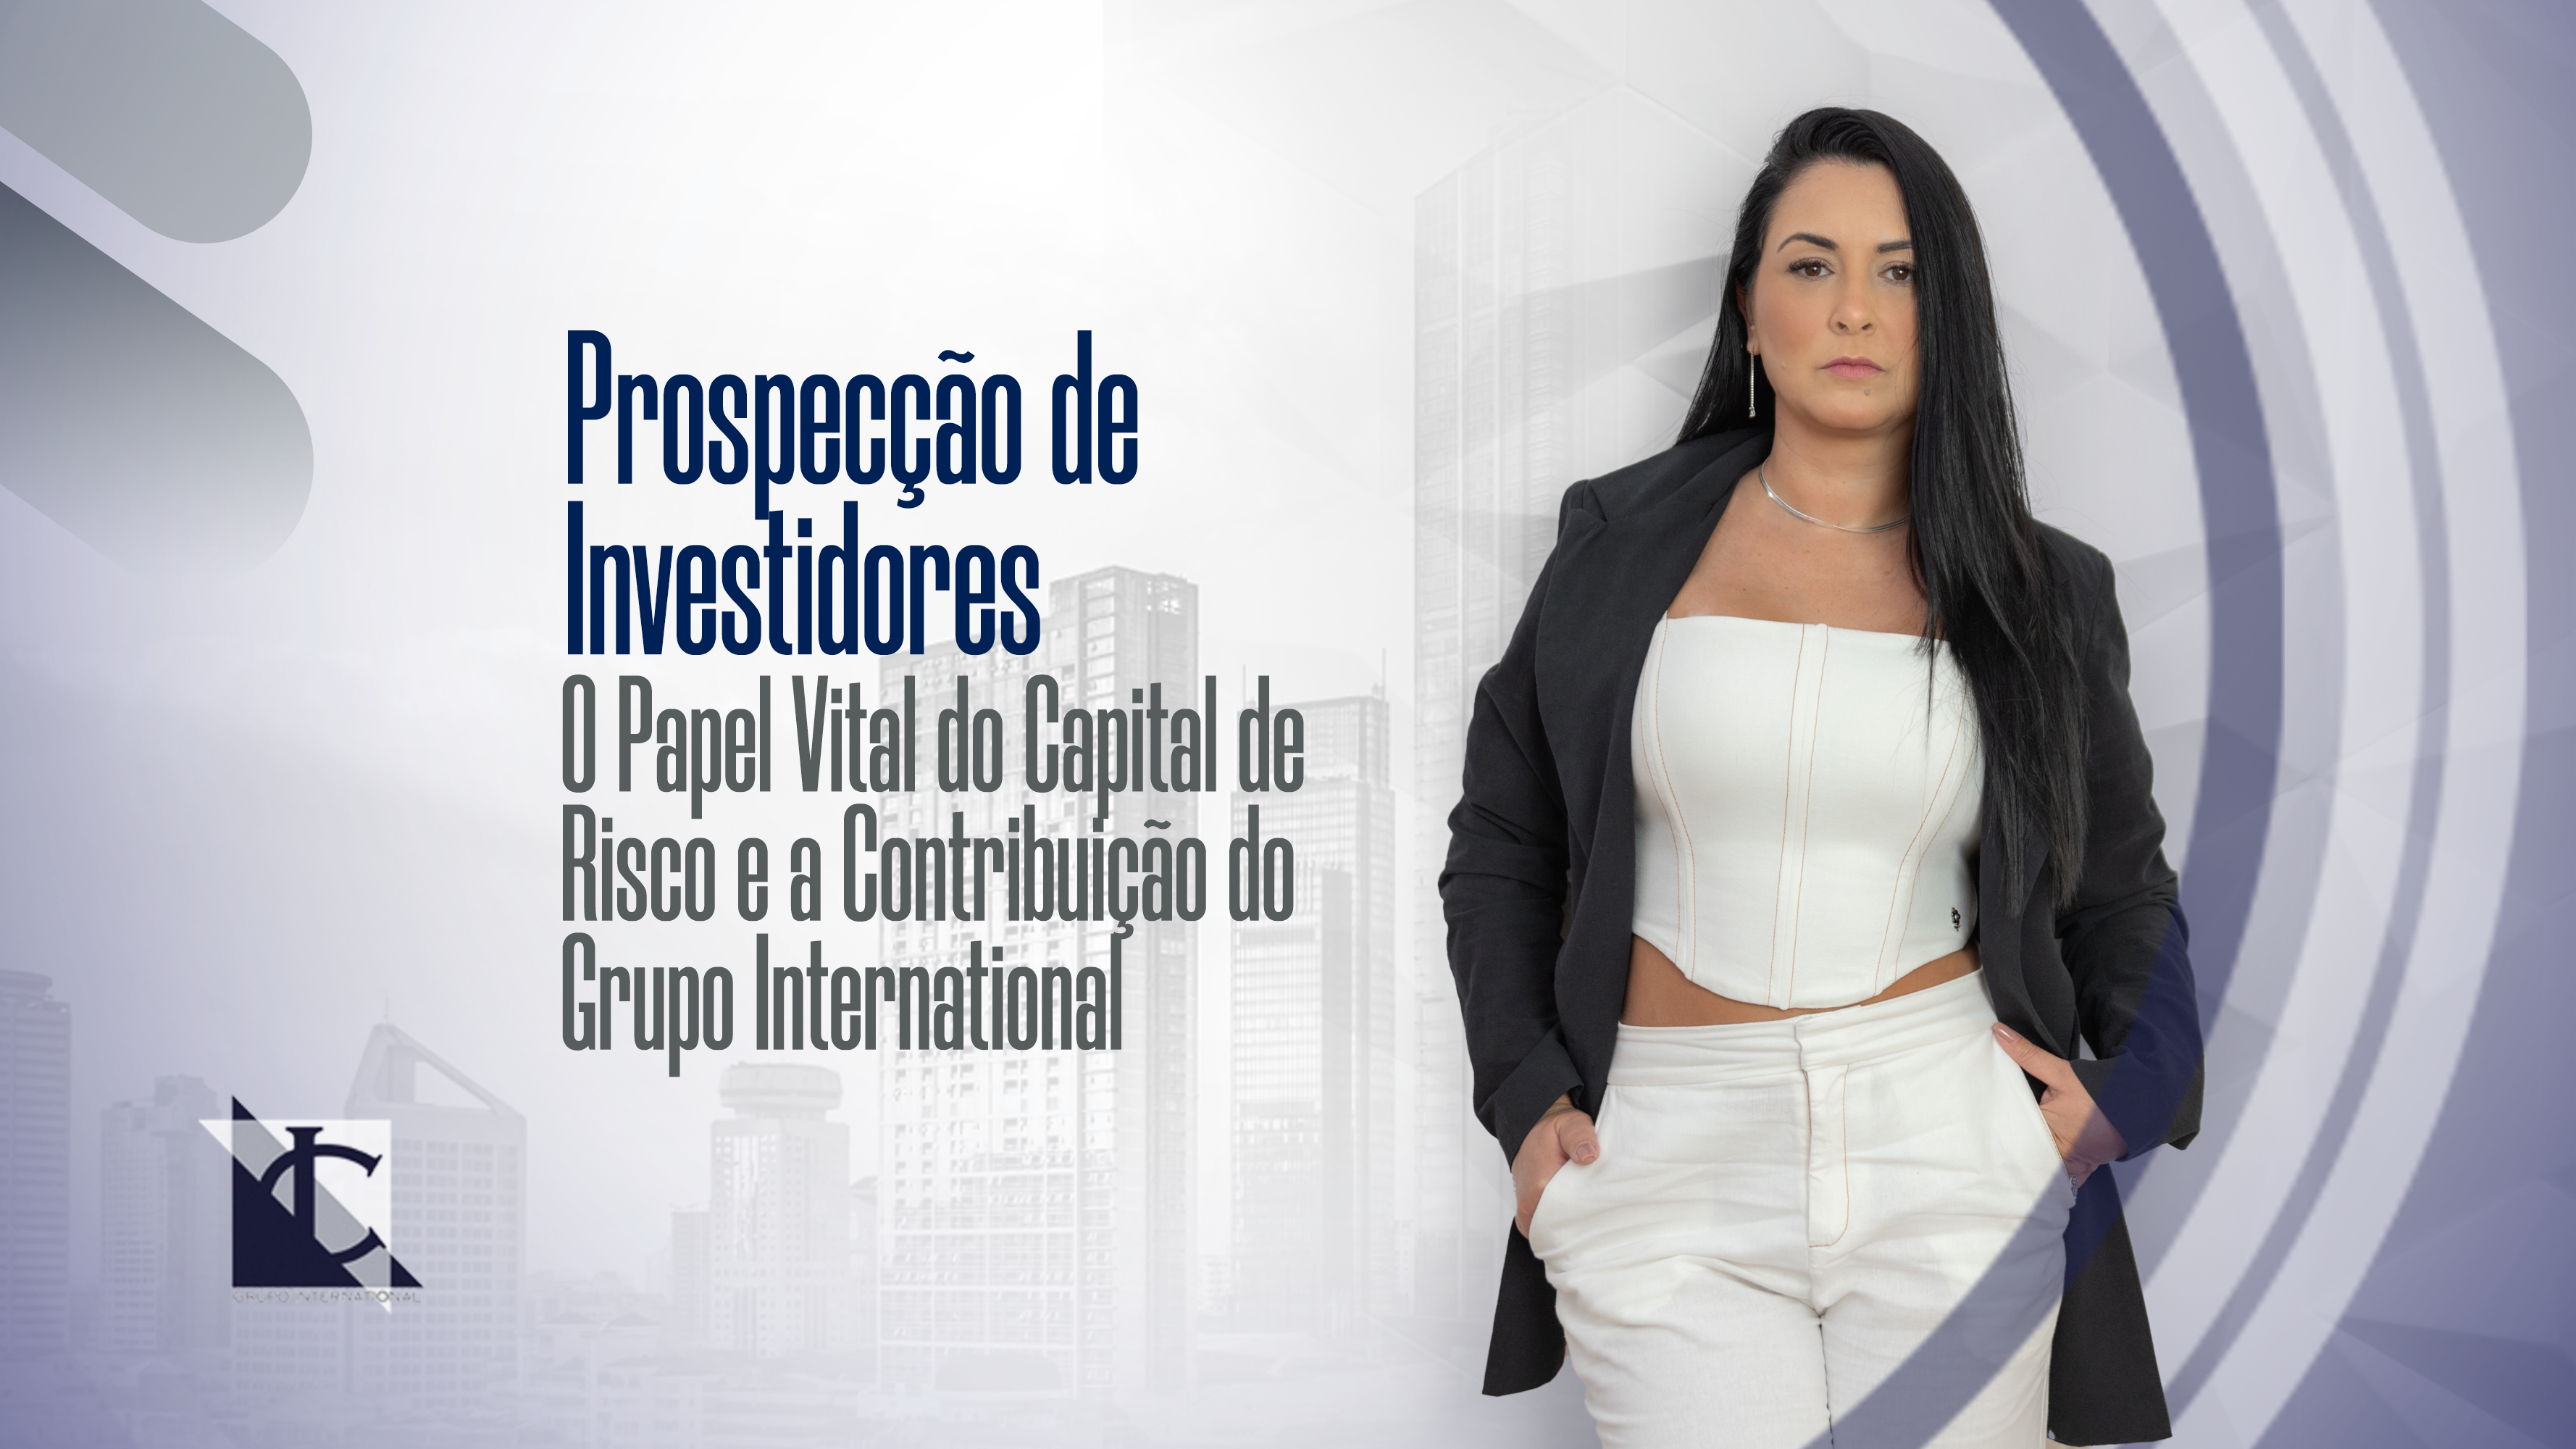 You are currently viewing Investor Prospecting: The Vital Role of Venture Capital and the Contribution of Grupo International